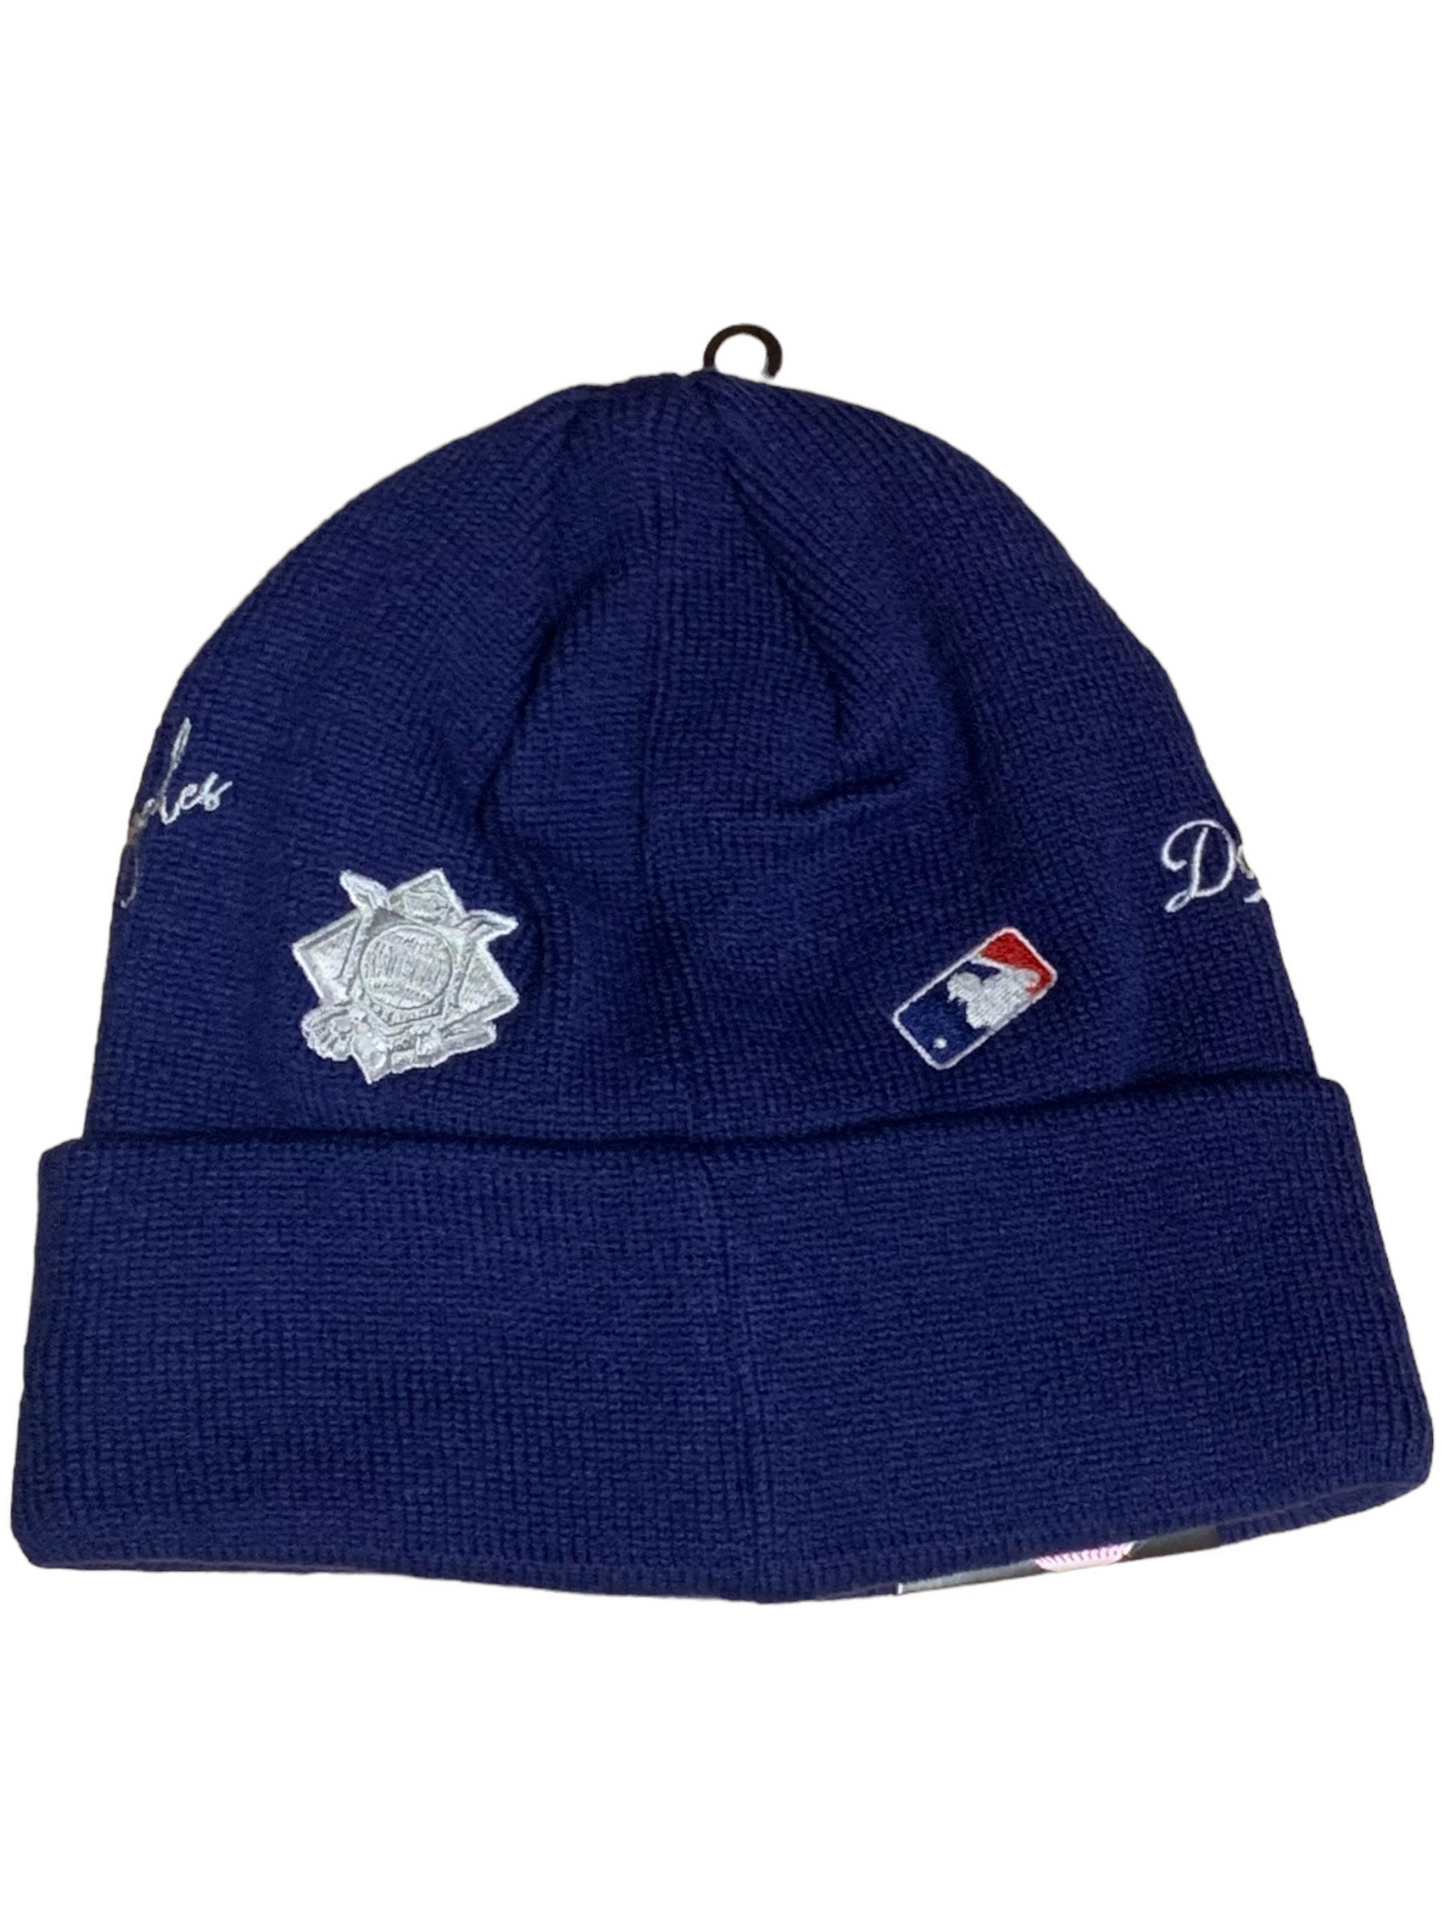 LOS ANGELES DODGERS IDENTITY KNIT BEANIE HAT